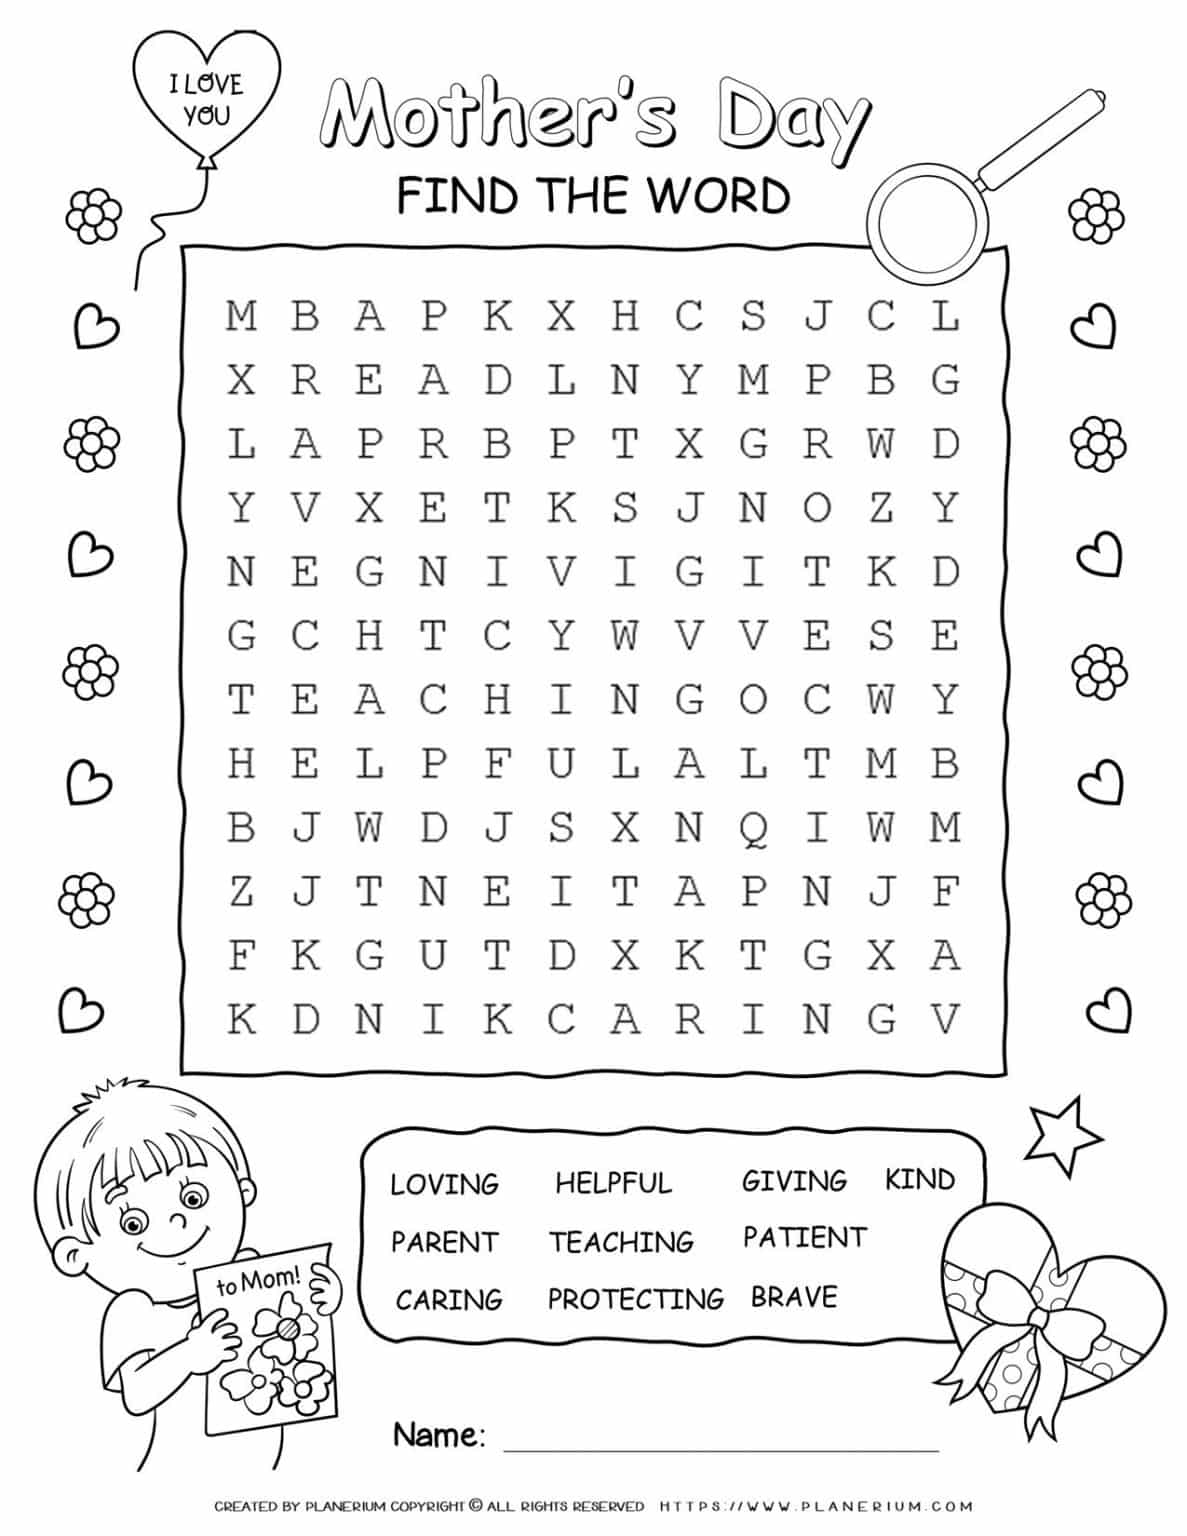 Mother #39 s Day Word Search Puzzle Planerium